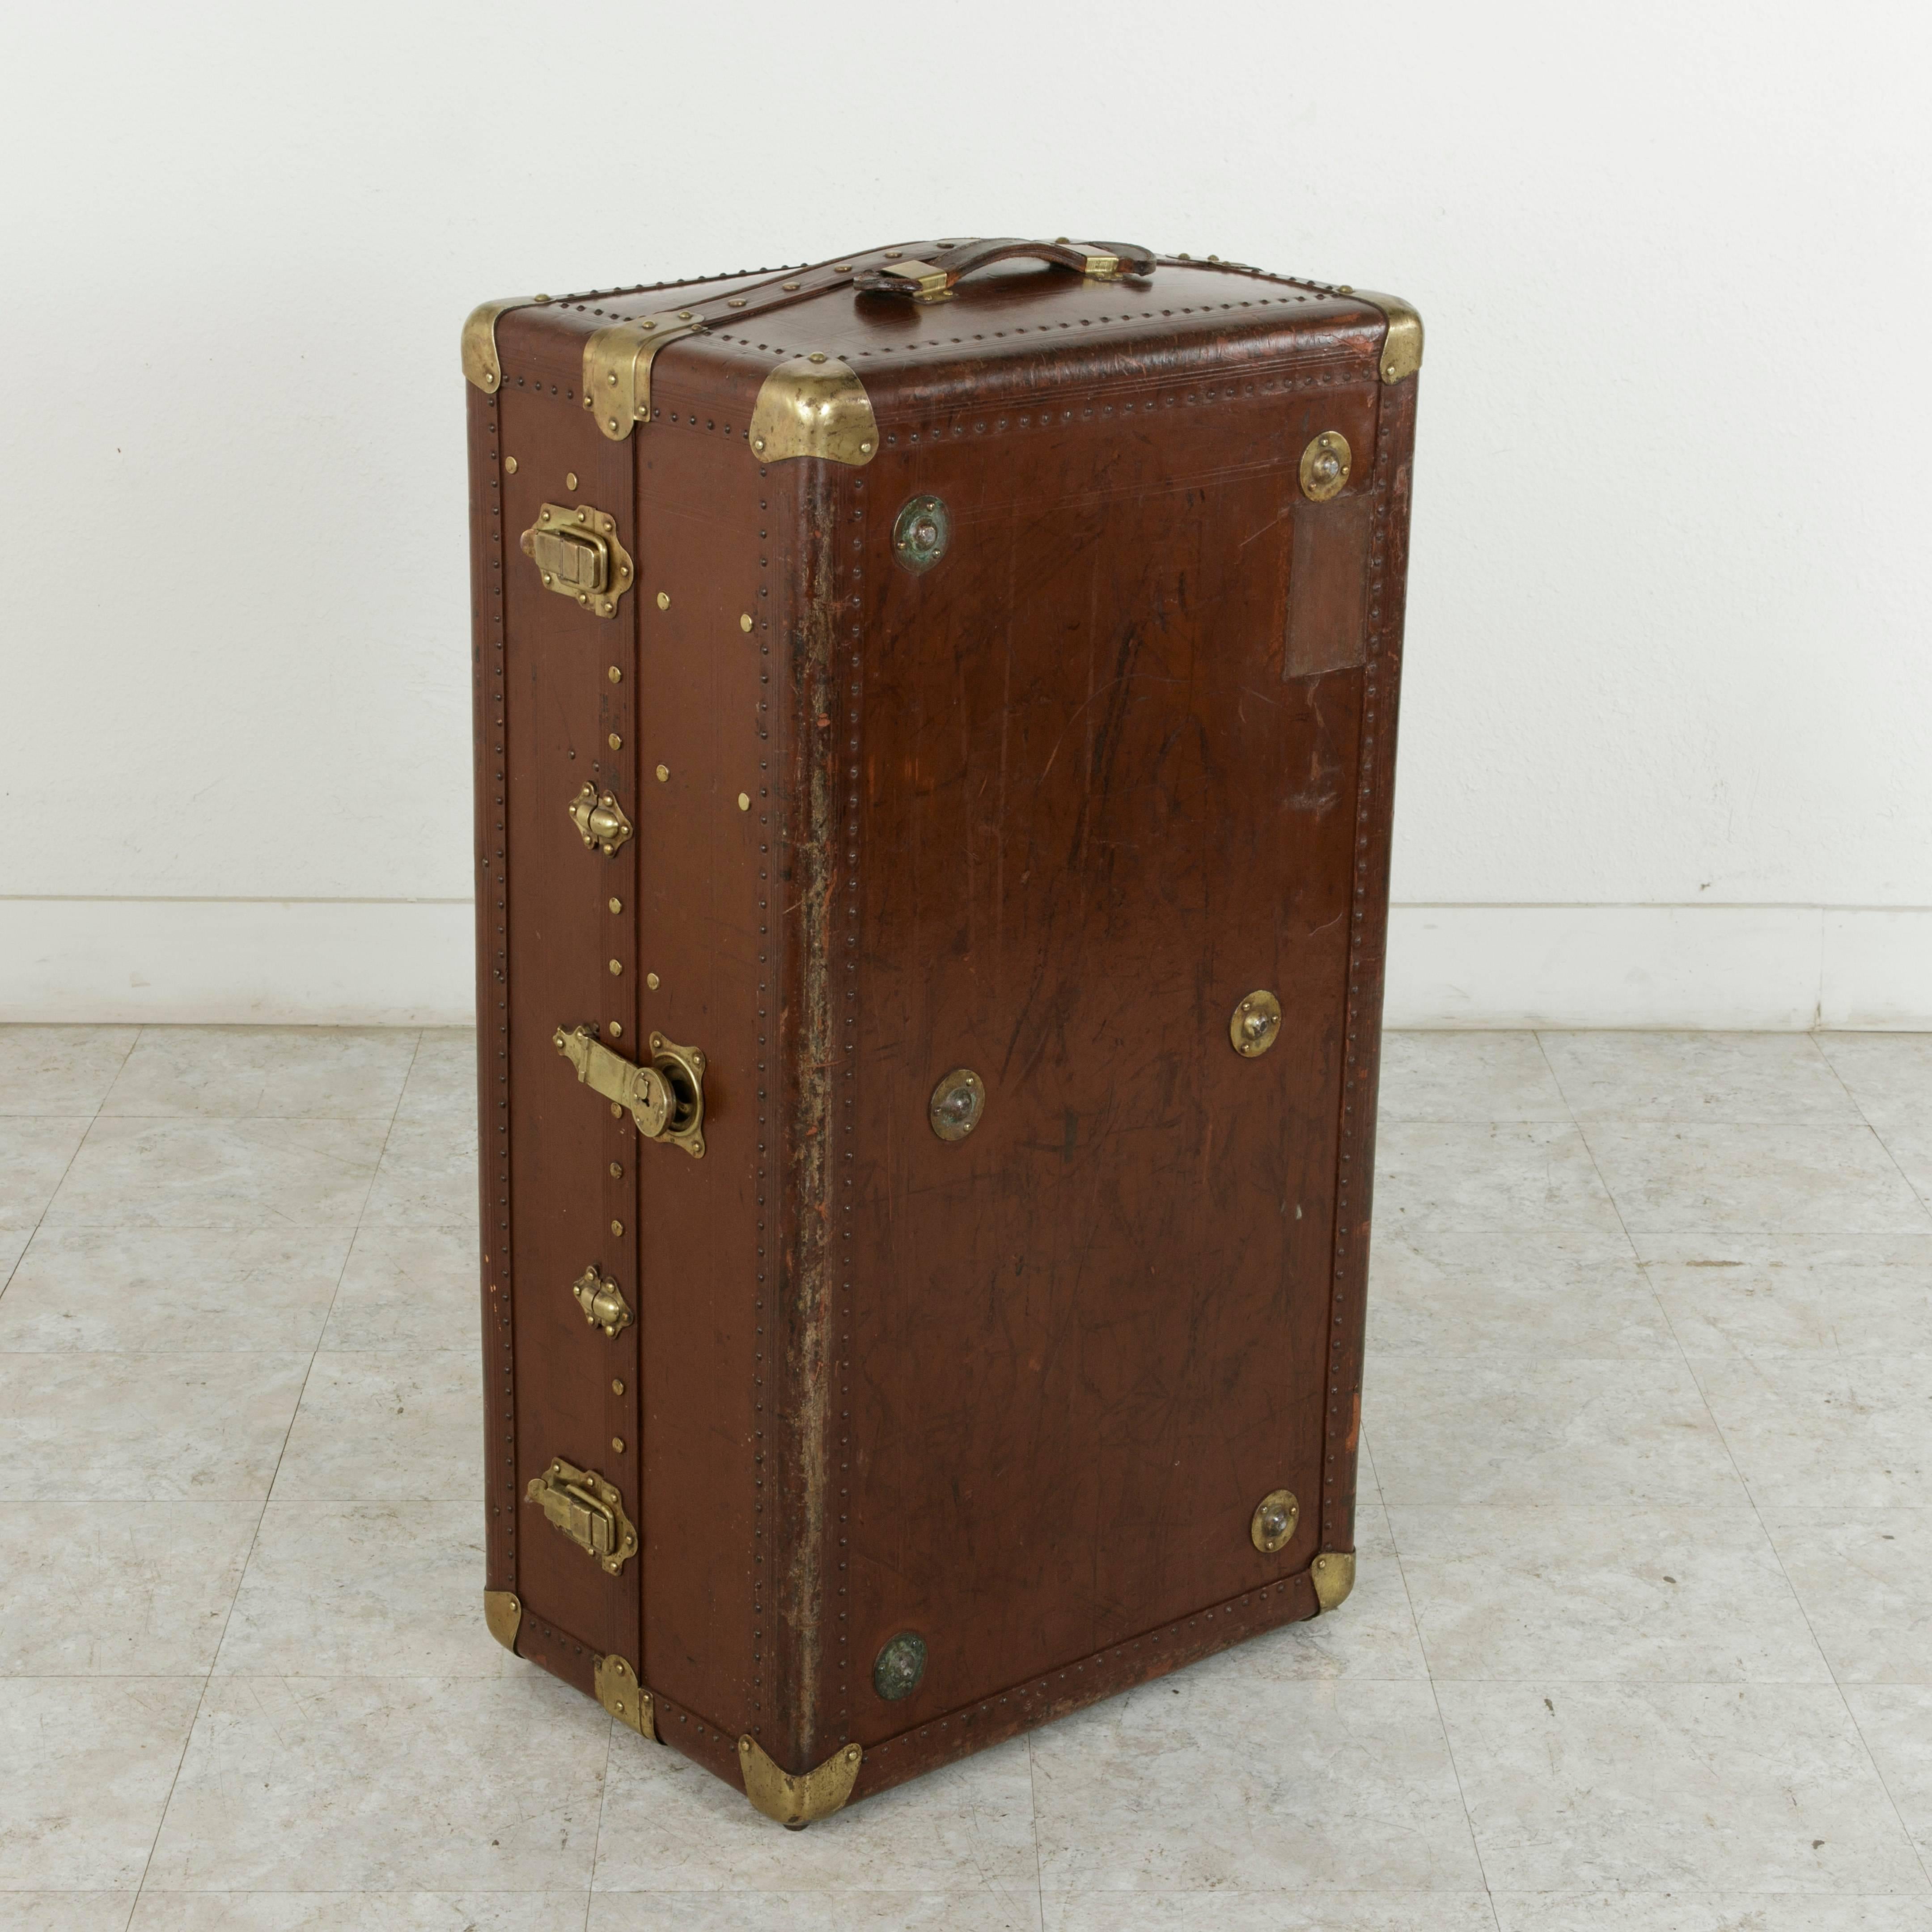 A piece of world traveling history, this leather steam trunk has its own story to tell. It bears its original aged travel sticker from Nancy-Ville, a city in the region of Lorraine, France. This early 20th century steam trunk features numerous